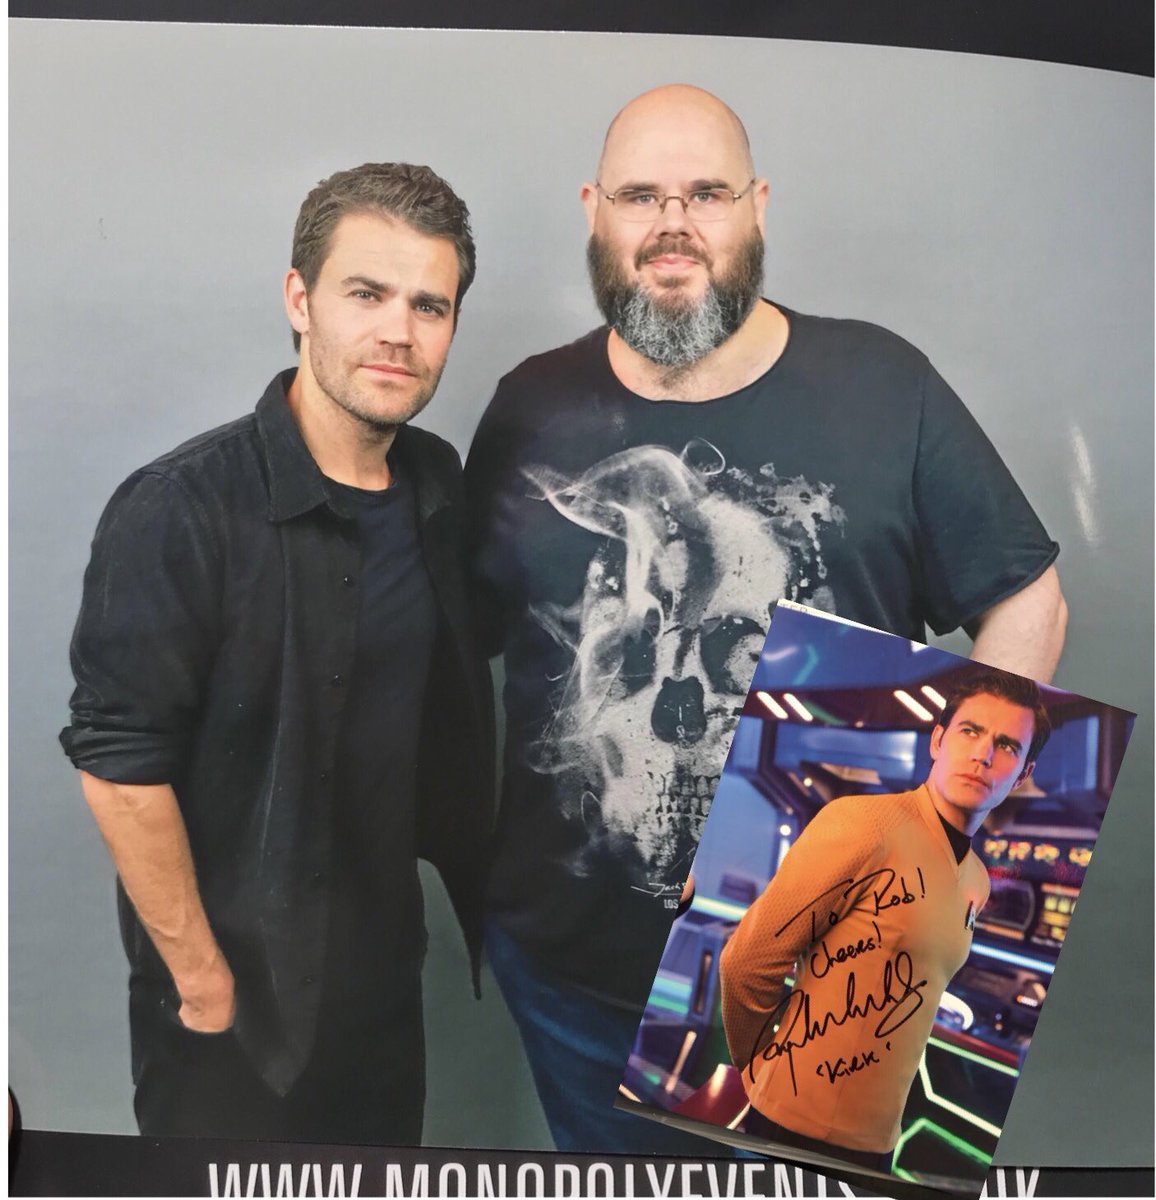 I also met the new and current Kirk from strange new worlds @paulwesley at @comconwales #comicconwales yesterday #StarTrek , another nice guest!